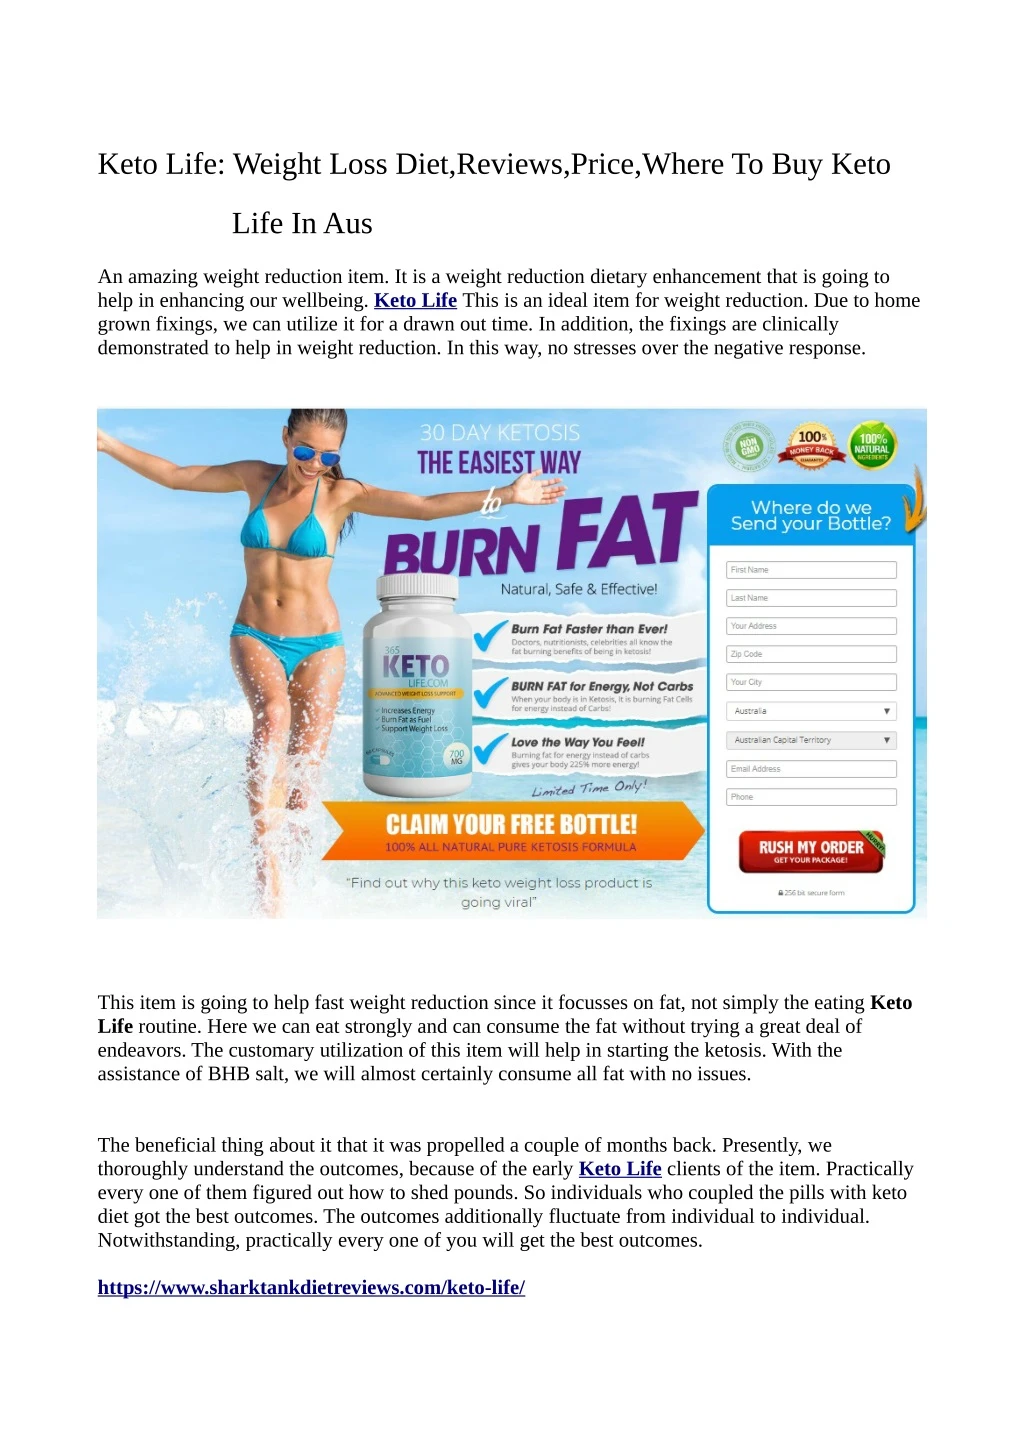 keto life weight loss diet reviews price where